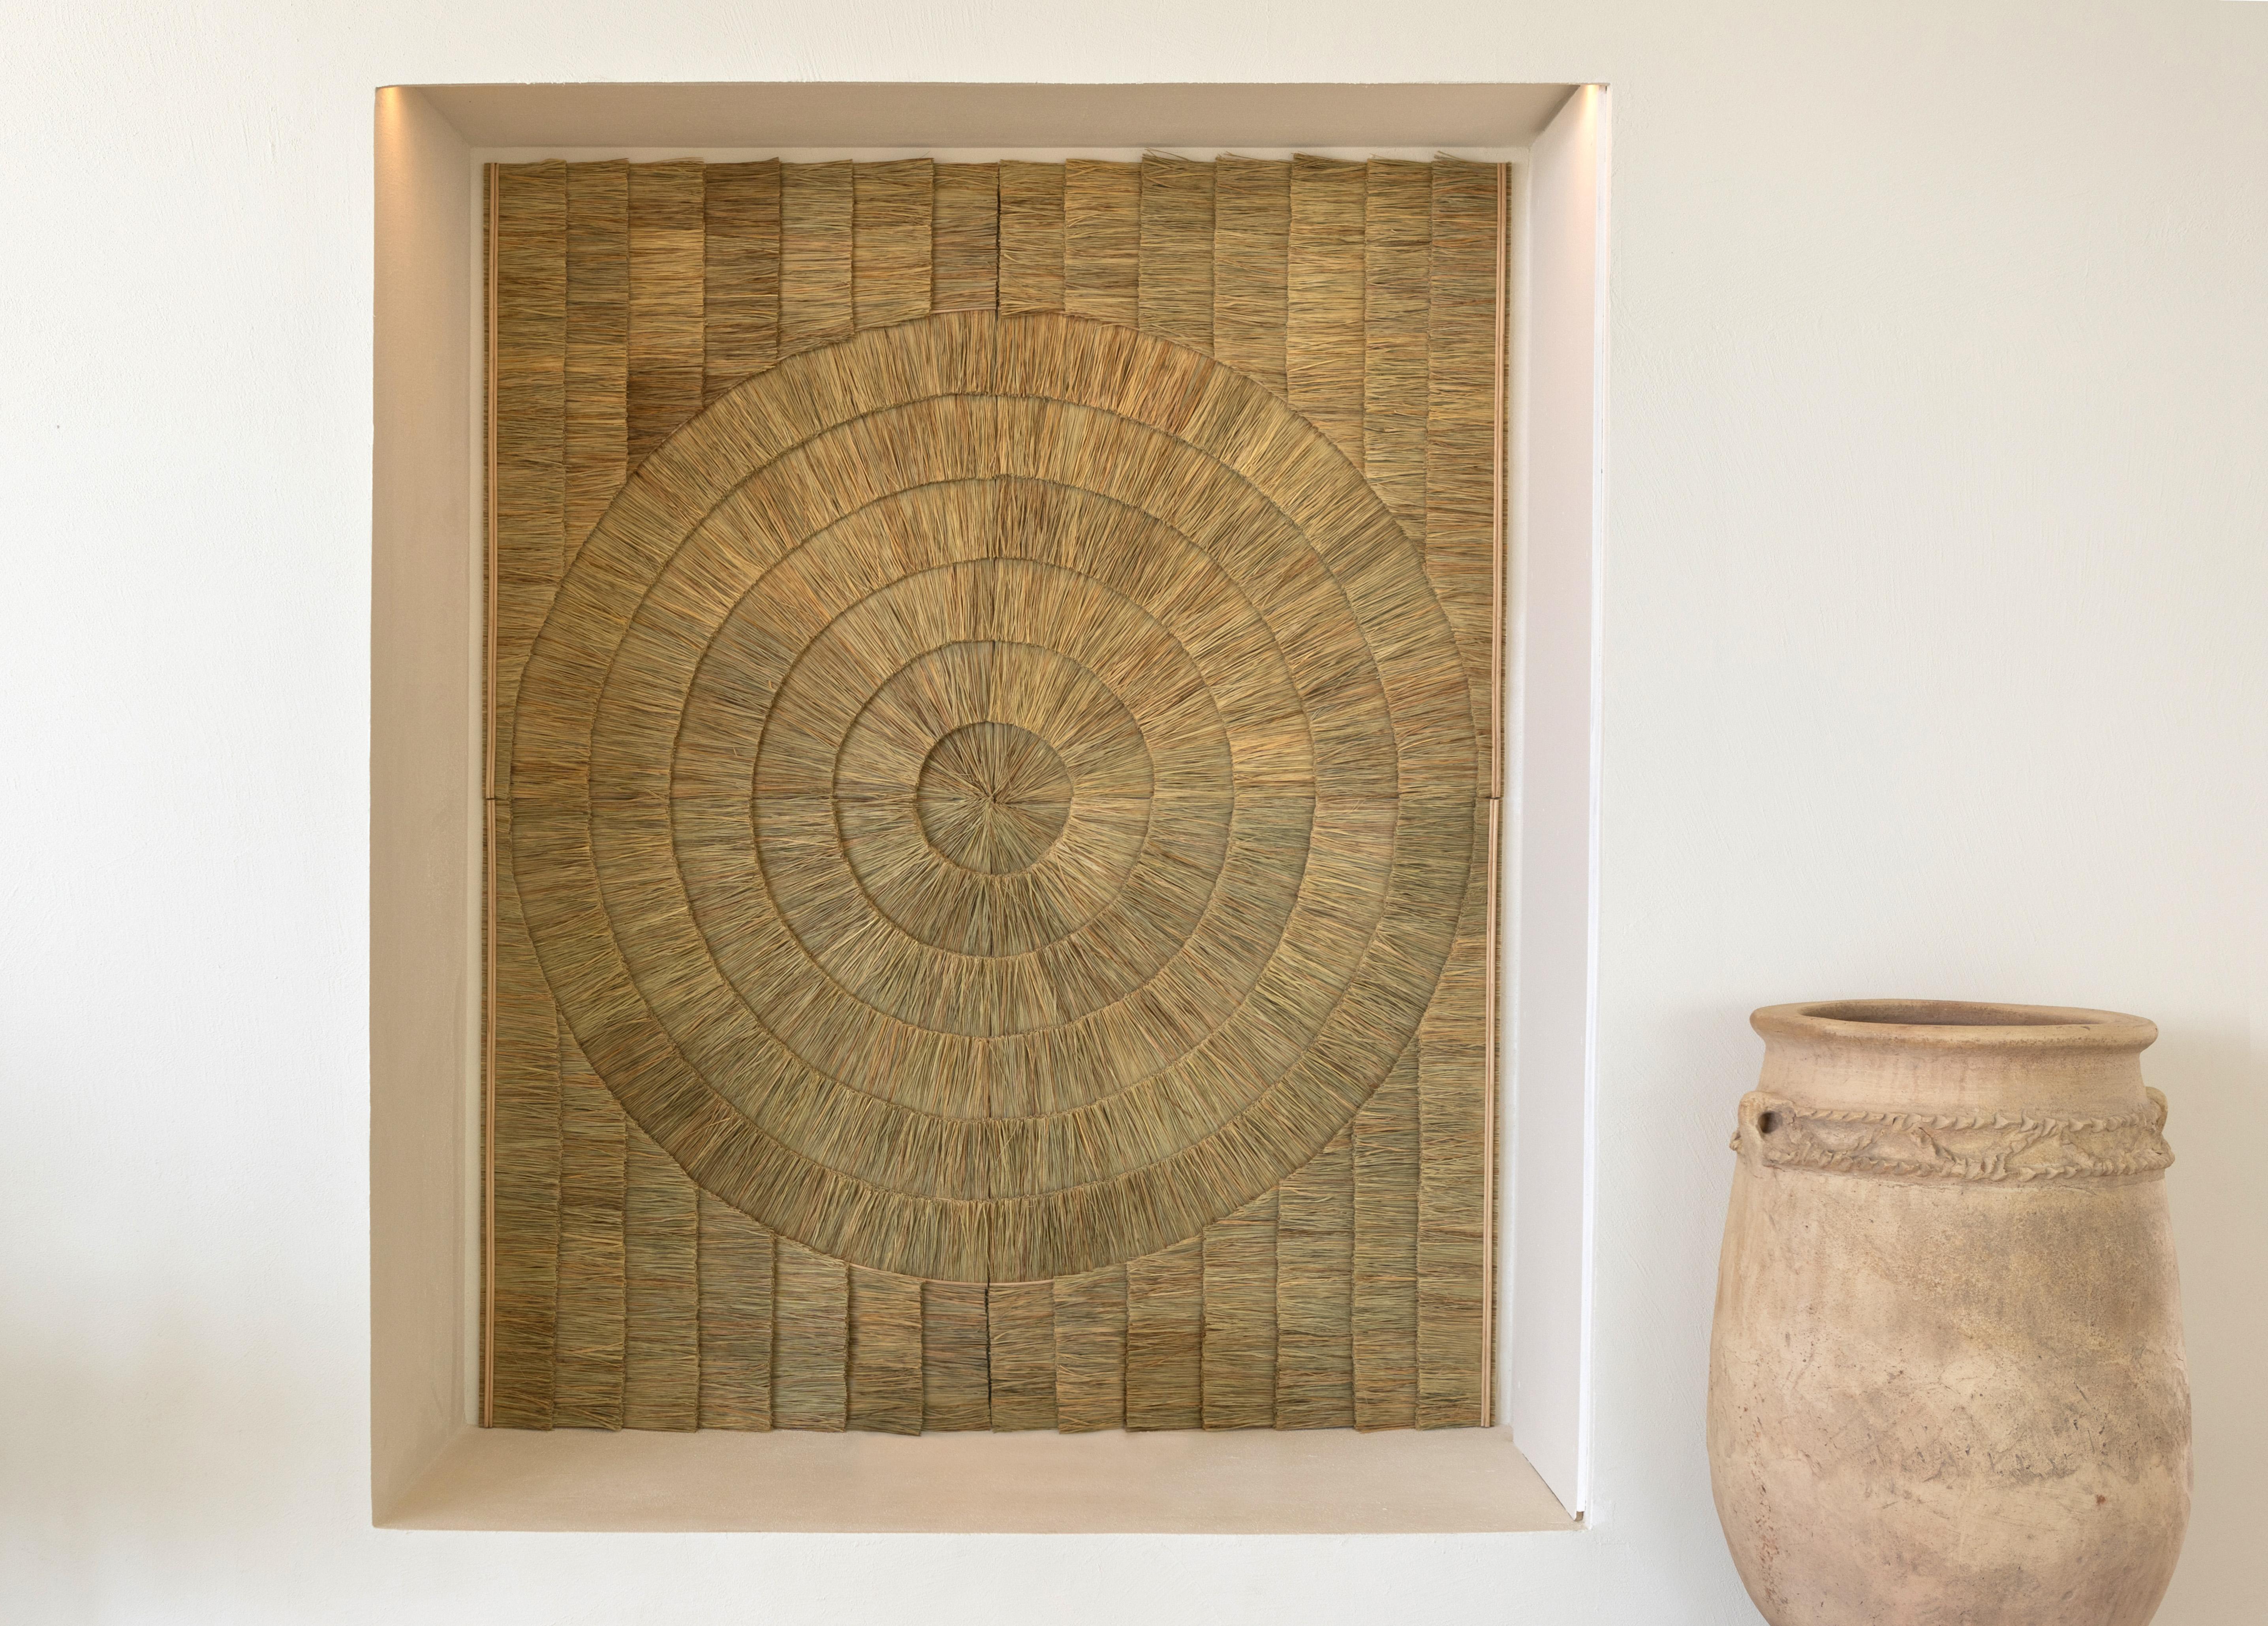 Interspersing circular and grid shapes, Thaïs balances masculinity and femininity in equal parts. This large tableau is a symbol that shows a different way of working with vegetable fibers and creating contemporary works of crafts. In its